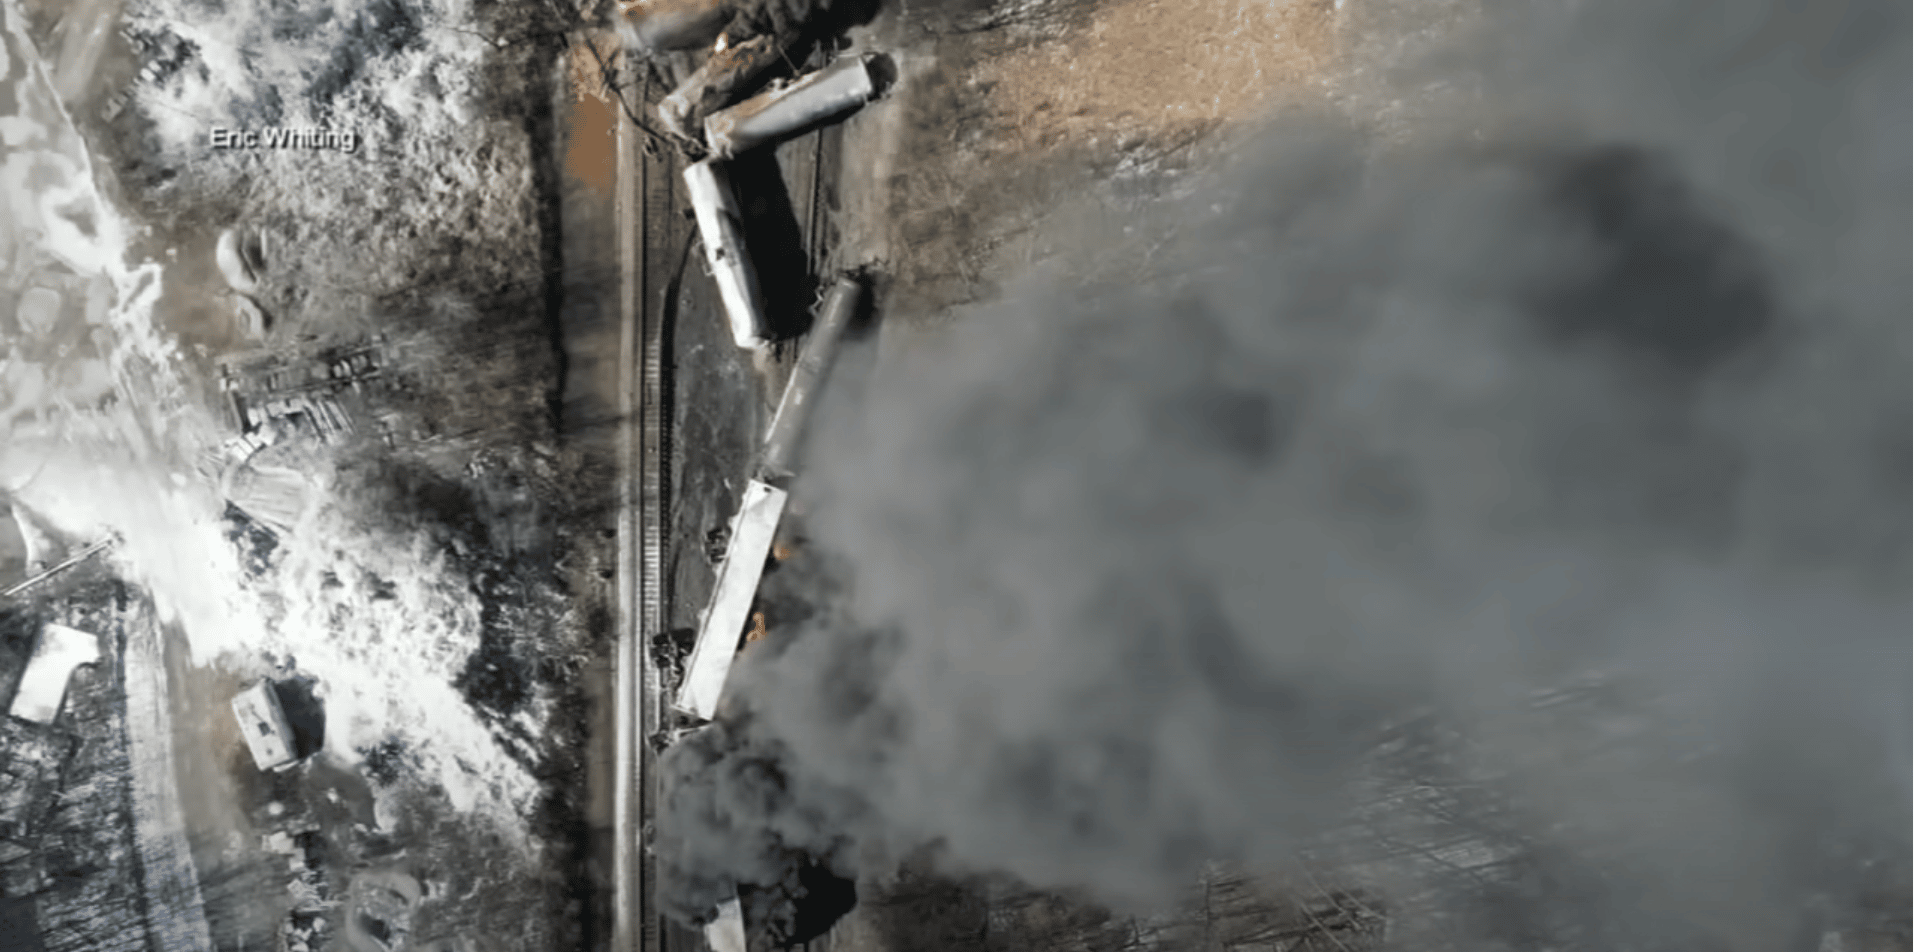 East Palestine residents are reporting shocking illnesses after train derailment